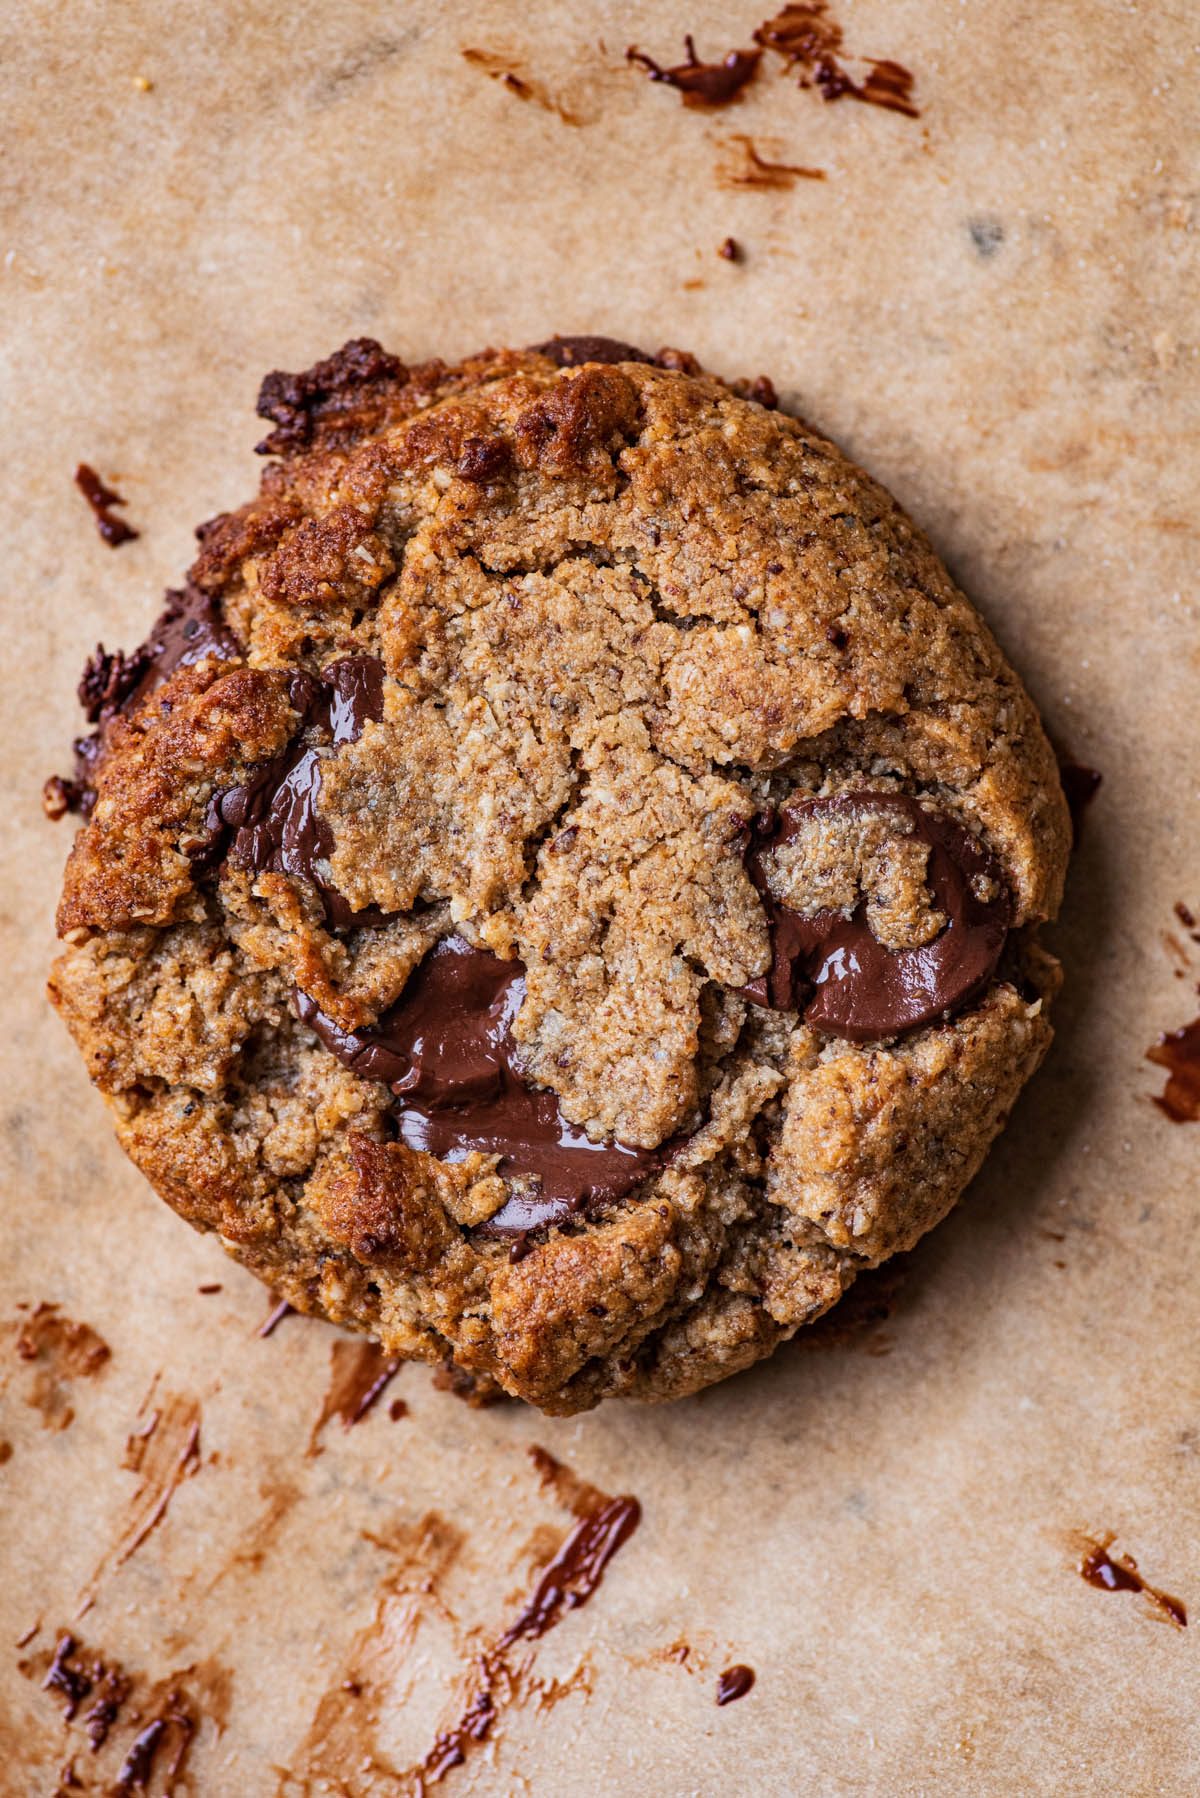 Close up of a chocolate chip cookie on parchment paper.